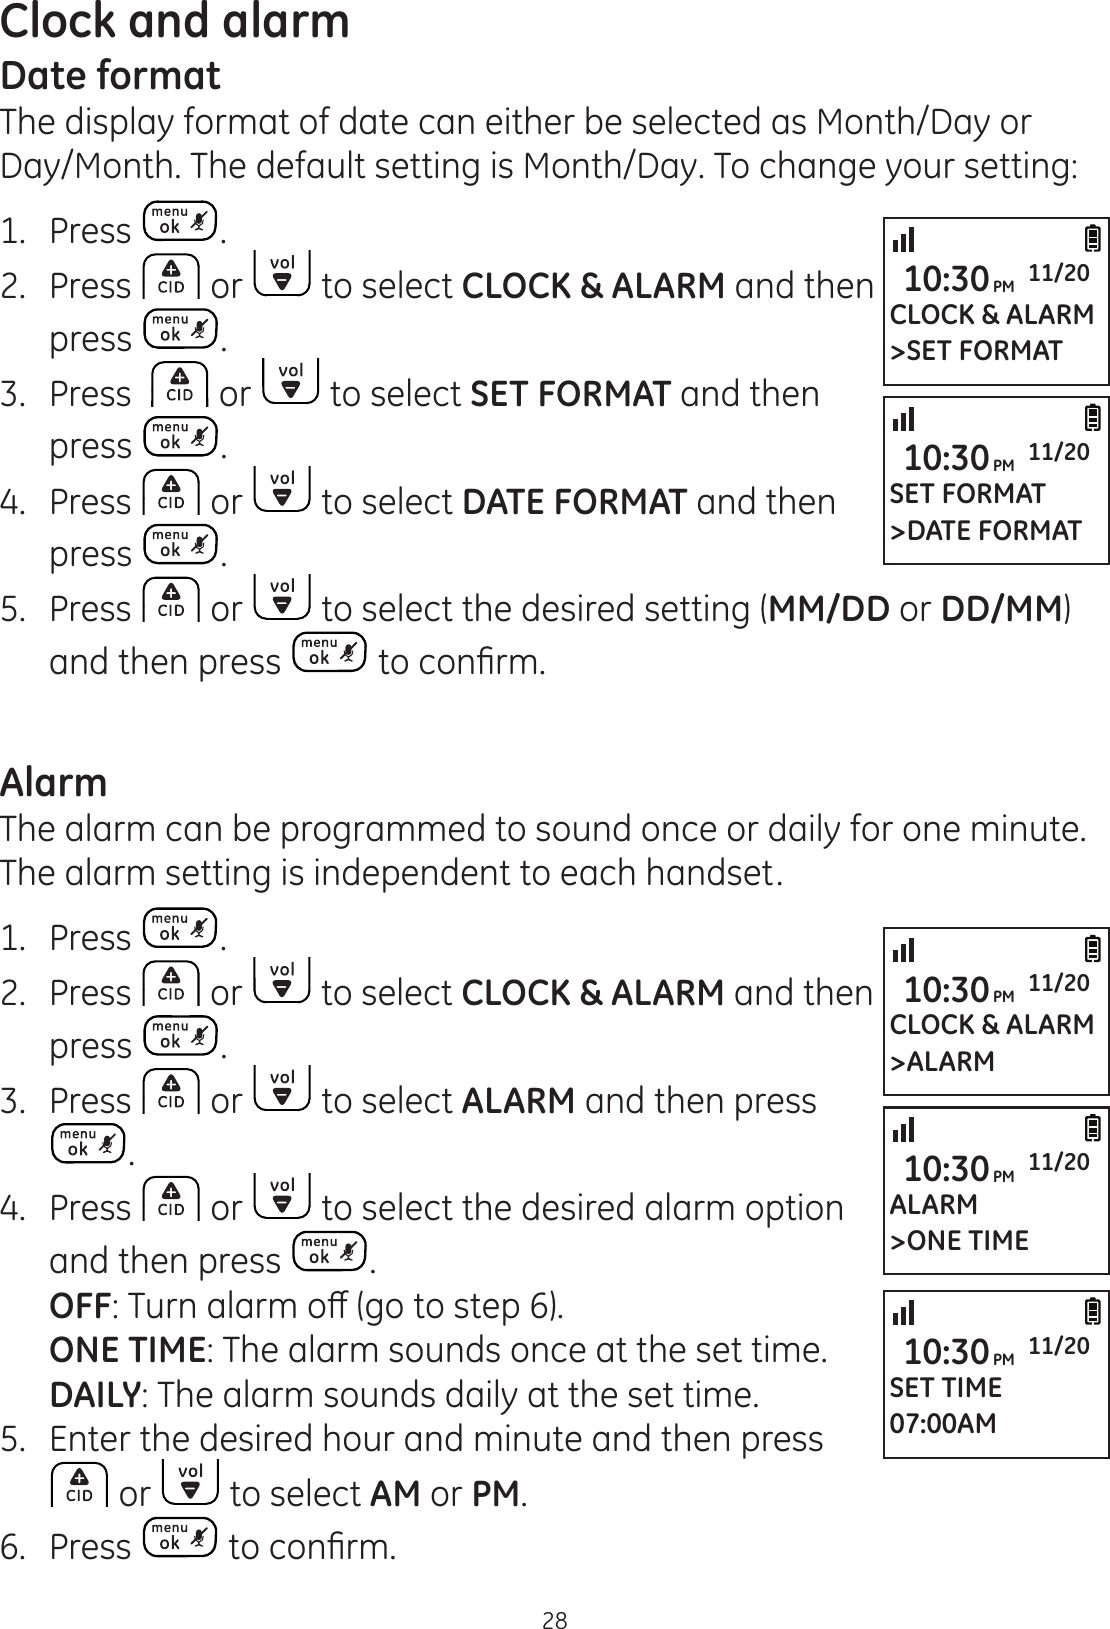 Clock and alarm28Date formatThe display format of date can either be selected as Month/Day or Day/Month. The default setting is Month/Day. To change your setting:1.  Press .2.  Press   or   to select CLOCK &amp; ALARM and then press  .3.  Press    or   to select SET FORMAT and then press  .4.  Press   or   to select DATE FORMAT and then  press  .5.  Press   or   to select the desired setting (MM/DD or DD/MM) and then press  WRFRQ¿UPAlarmThe alarm can be programmed to sound once or daily for one minute. The alarm setting is independent to each handset.1.  Press  .2.  Press   or   to select CLOCK &amp; ALARM and then  press  .3.  Press   or   to select ALARM and then press .4.  Press   or   to select the desired alarm option and then press  .  OFF7XUQDODUPRȺJRWRVWHS  ONE TIME: The alarm sounds once at the set time. DAILY: The alarm sounds daily at the set time.5.  Enter the desired hour and minute and then press  or   to select AM or PM.6.  Press  WRFRQ¿UPCLOCK &amp; ALARM&gt;ALARM10:30PM 11/20ALARM&gt;ONE TIME10:30PM 11/20SET TIME07:00AM10:30PM 11/20CLOCK &amp; ALARM&gt;SET FORMAT10:30PM 11/20SET FORMAT&gt;DATE FORMAT10:30PM 11/20